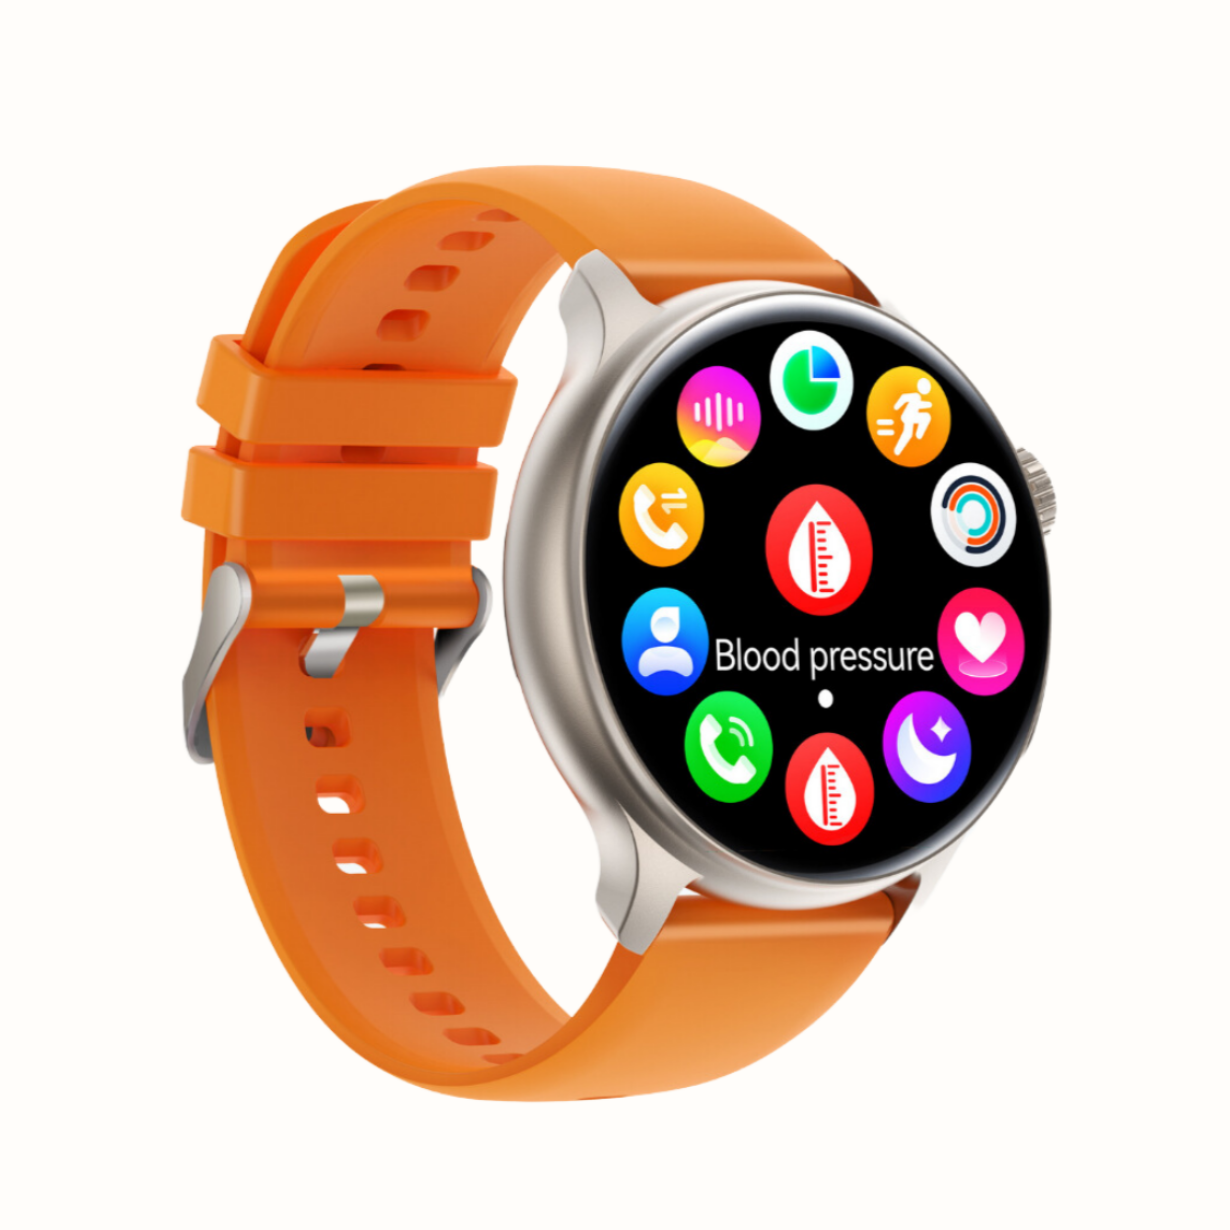 K58 Unisex Smartwatch, AMOLED Display, Setup with Android device, Setup with Apple Device, Water resistance - IP68, Best Smart Watch, 2023, Track Activity,Track WOmens Health, Pedometer, Calorie Monitor, Sleep Tracking, Heart Rate Monitor, Blood Oxygen Monitor- Spo2, Multisport Mode, Color- Orange